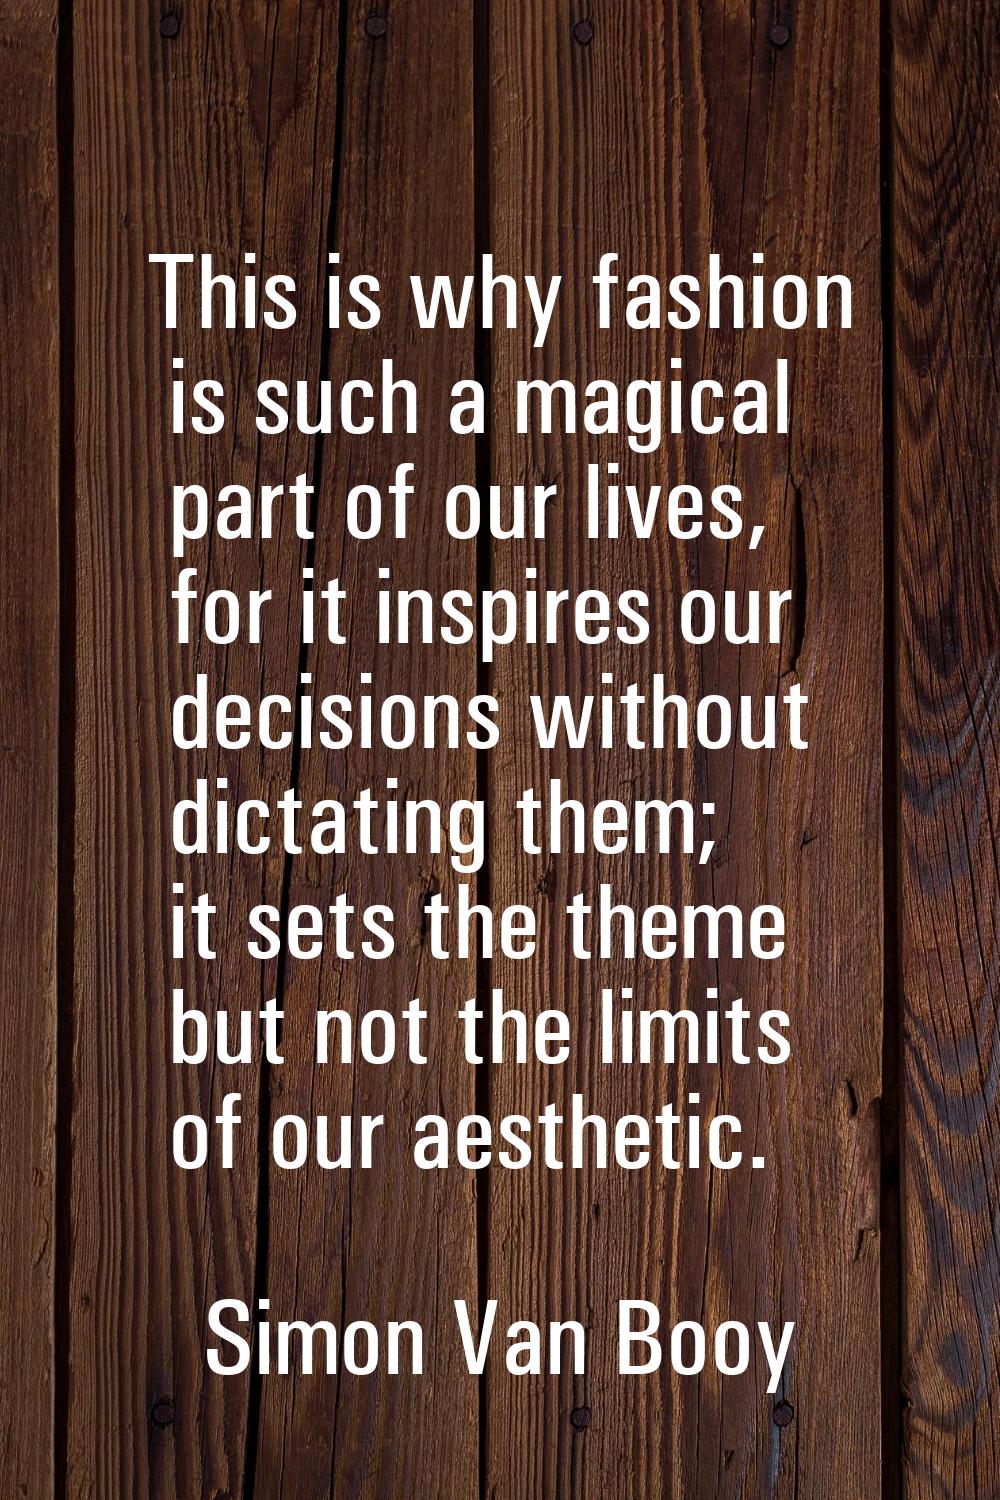 This is why fashion is such a magical part of our lives, for it inspires our decisions without dict